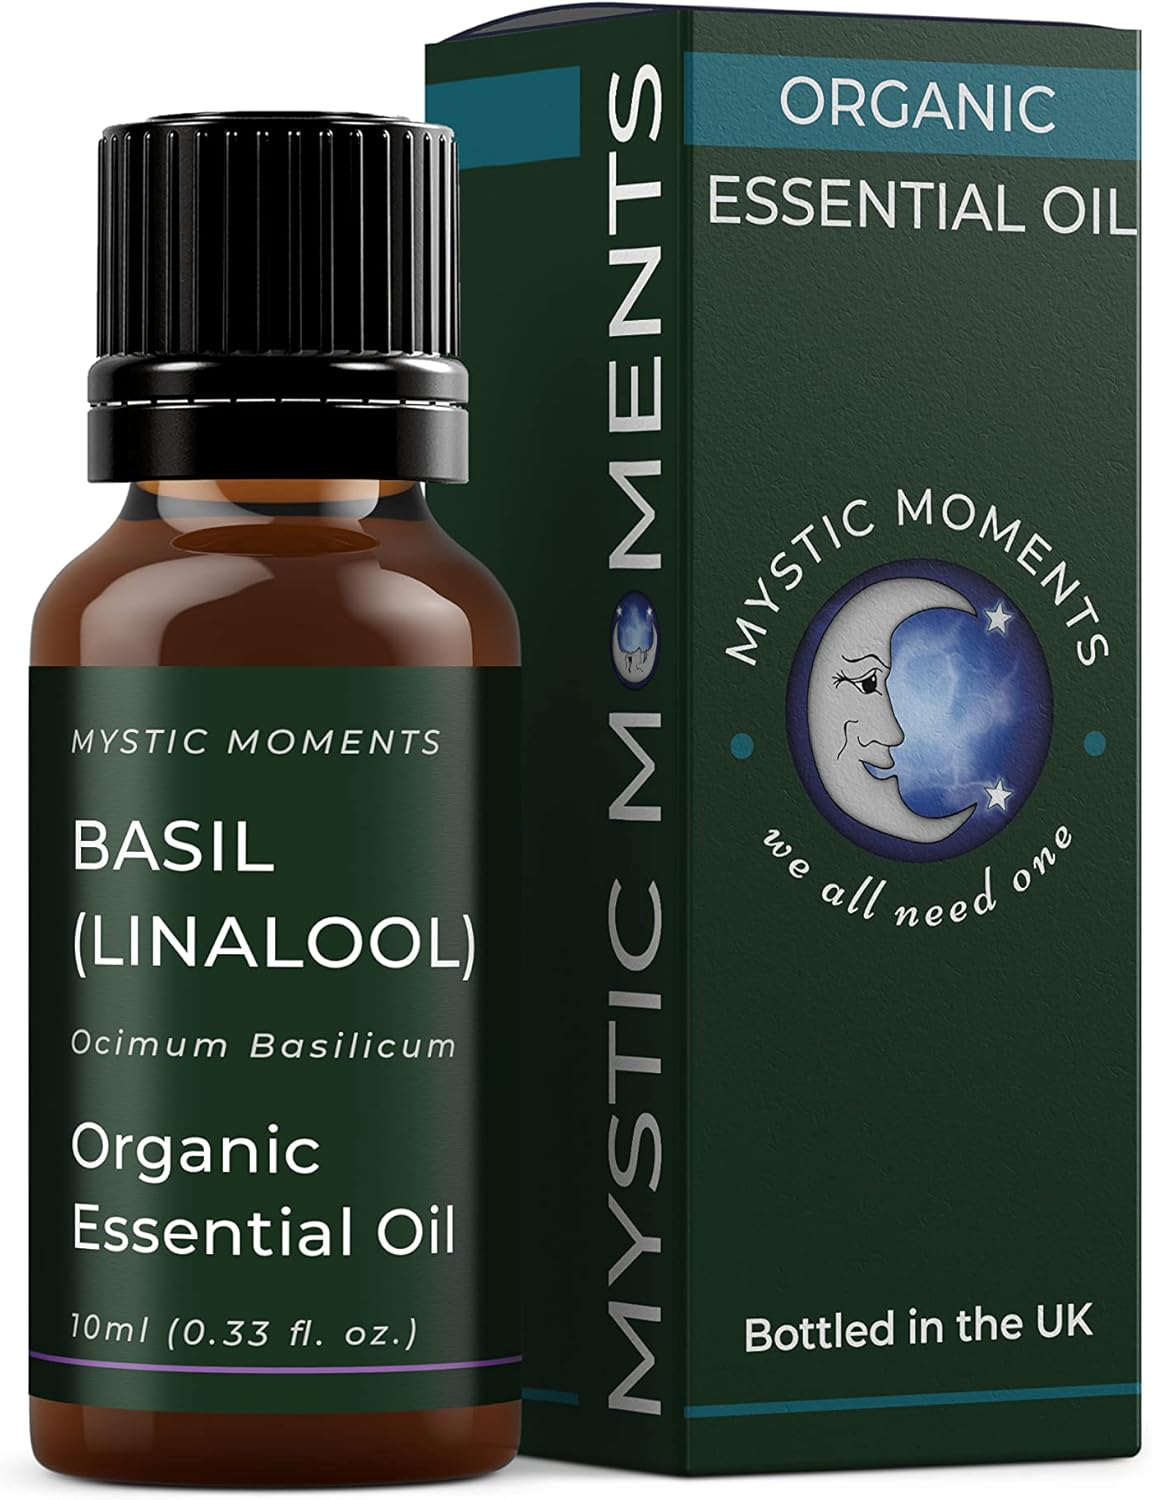 Mystic Moments | Organic Basil (Linalool) Essential Oil 10ml - Pure & Natural oil for Diffusers, Aromatherapy & Massage Blends Vegan GMO Free